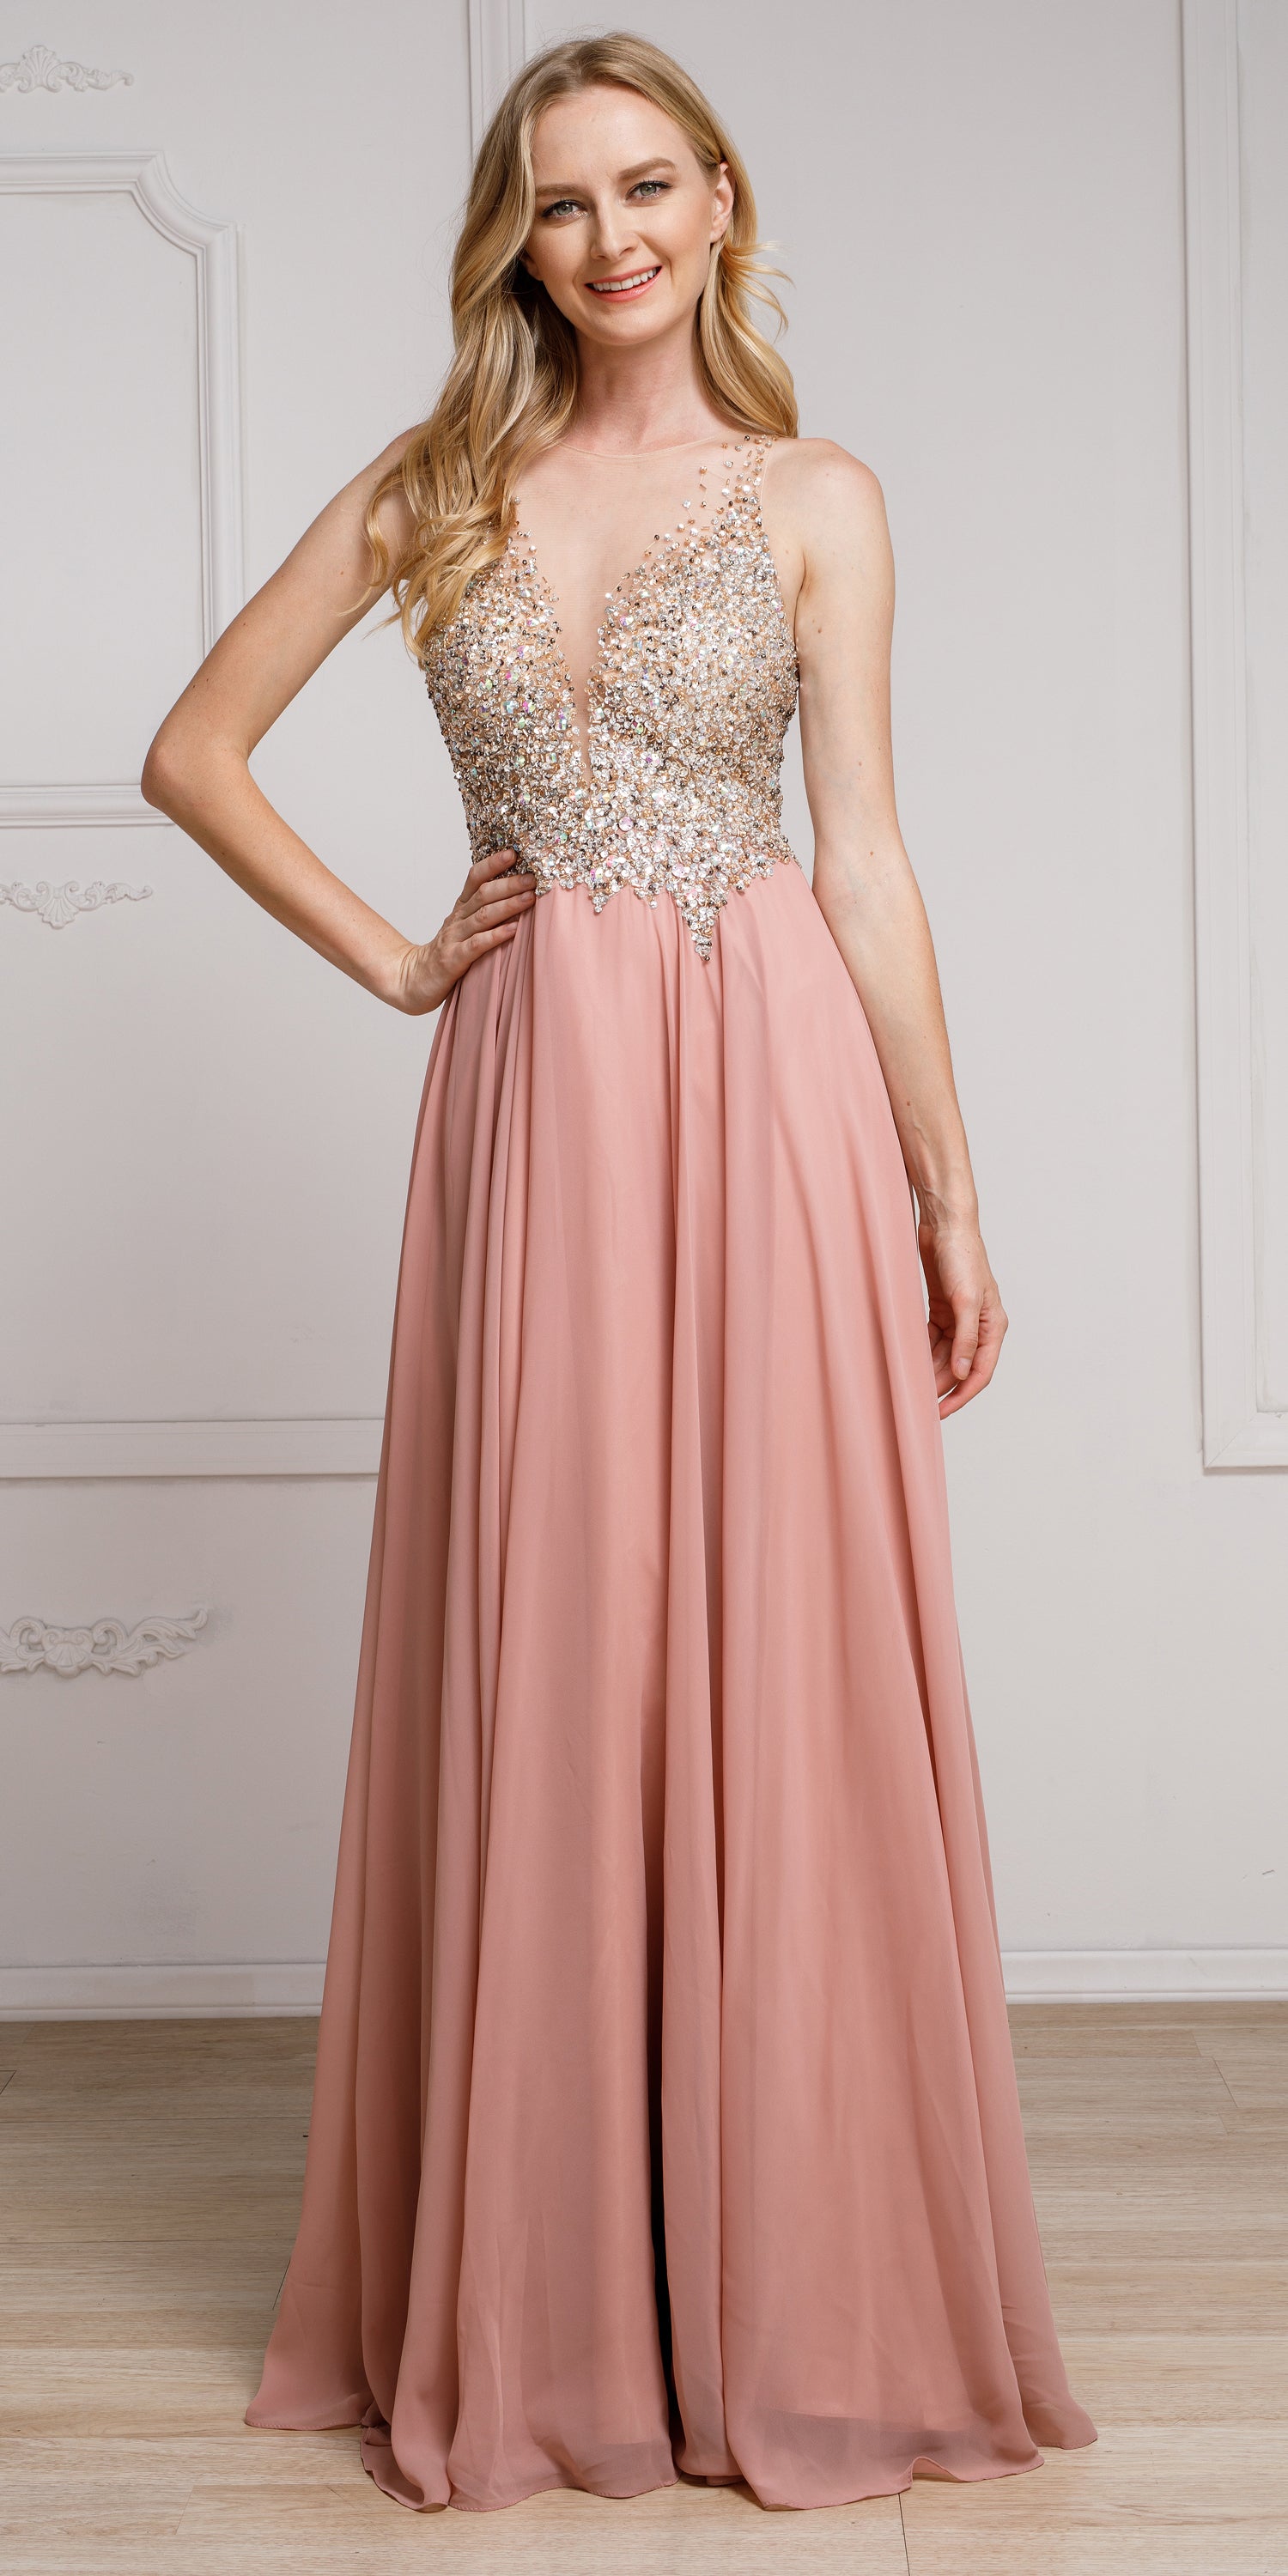 Image of Sequined Plunging Neckine Prom Gown in Dusty Rose